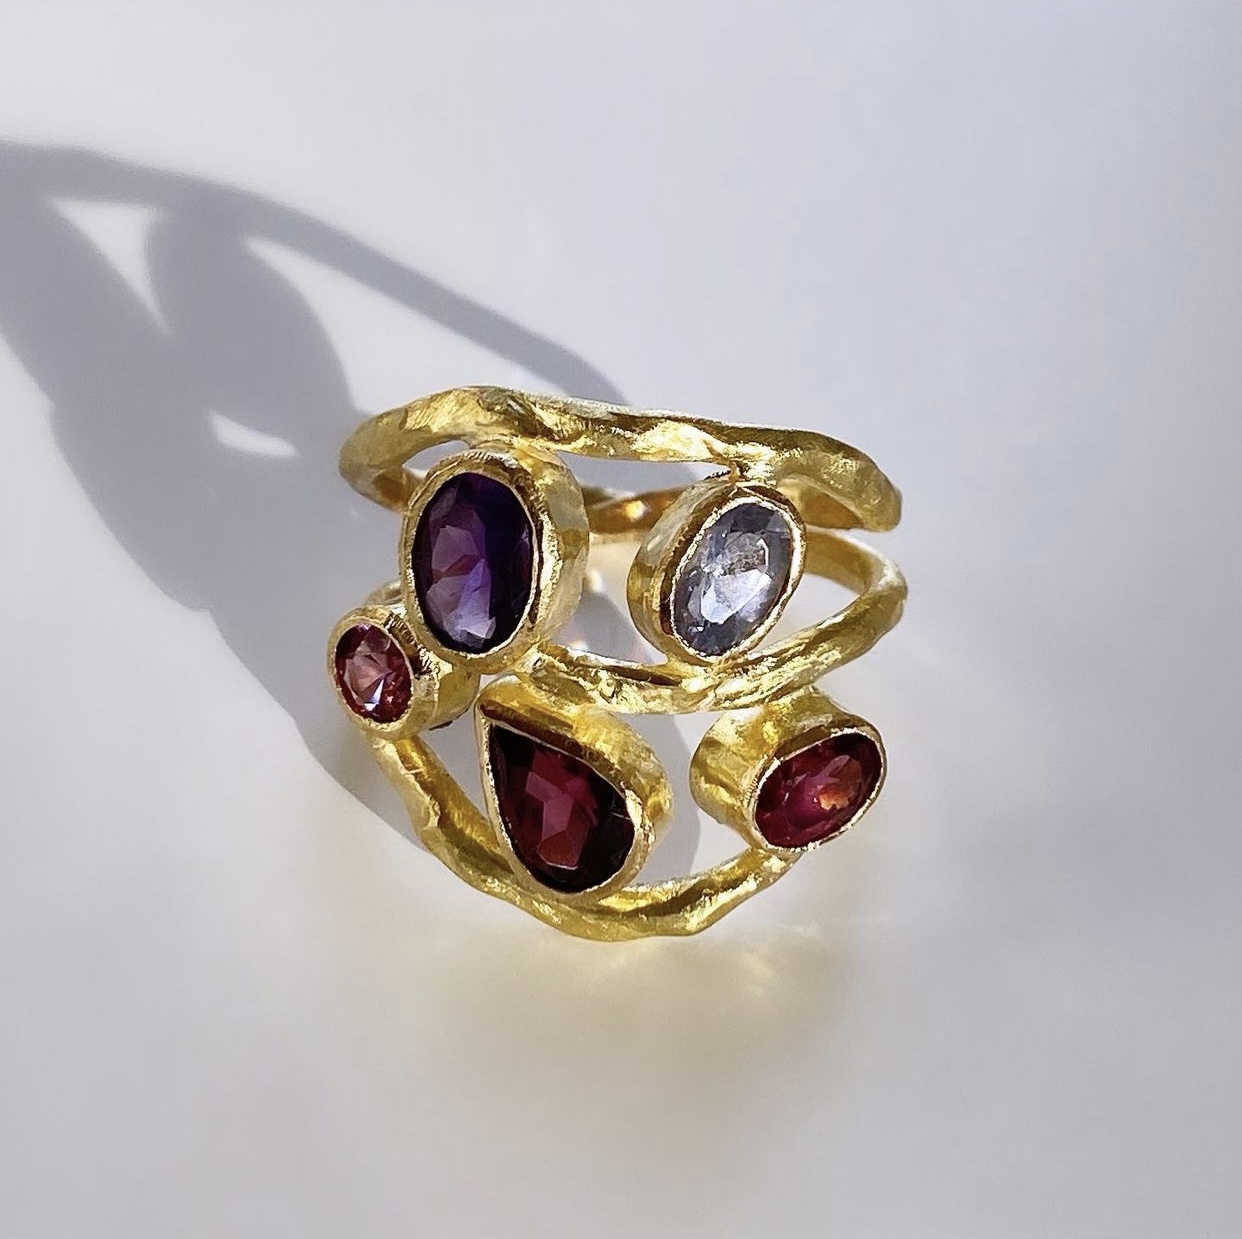 Bespoke Ring Using Client's Own Heirloom Gemstones. Image Courtesy of S Faurschou